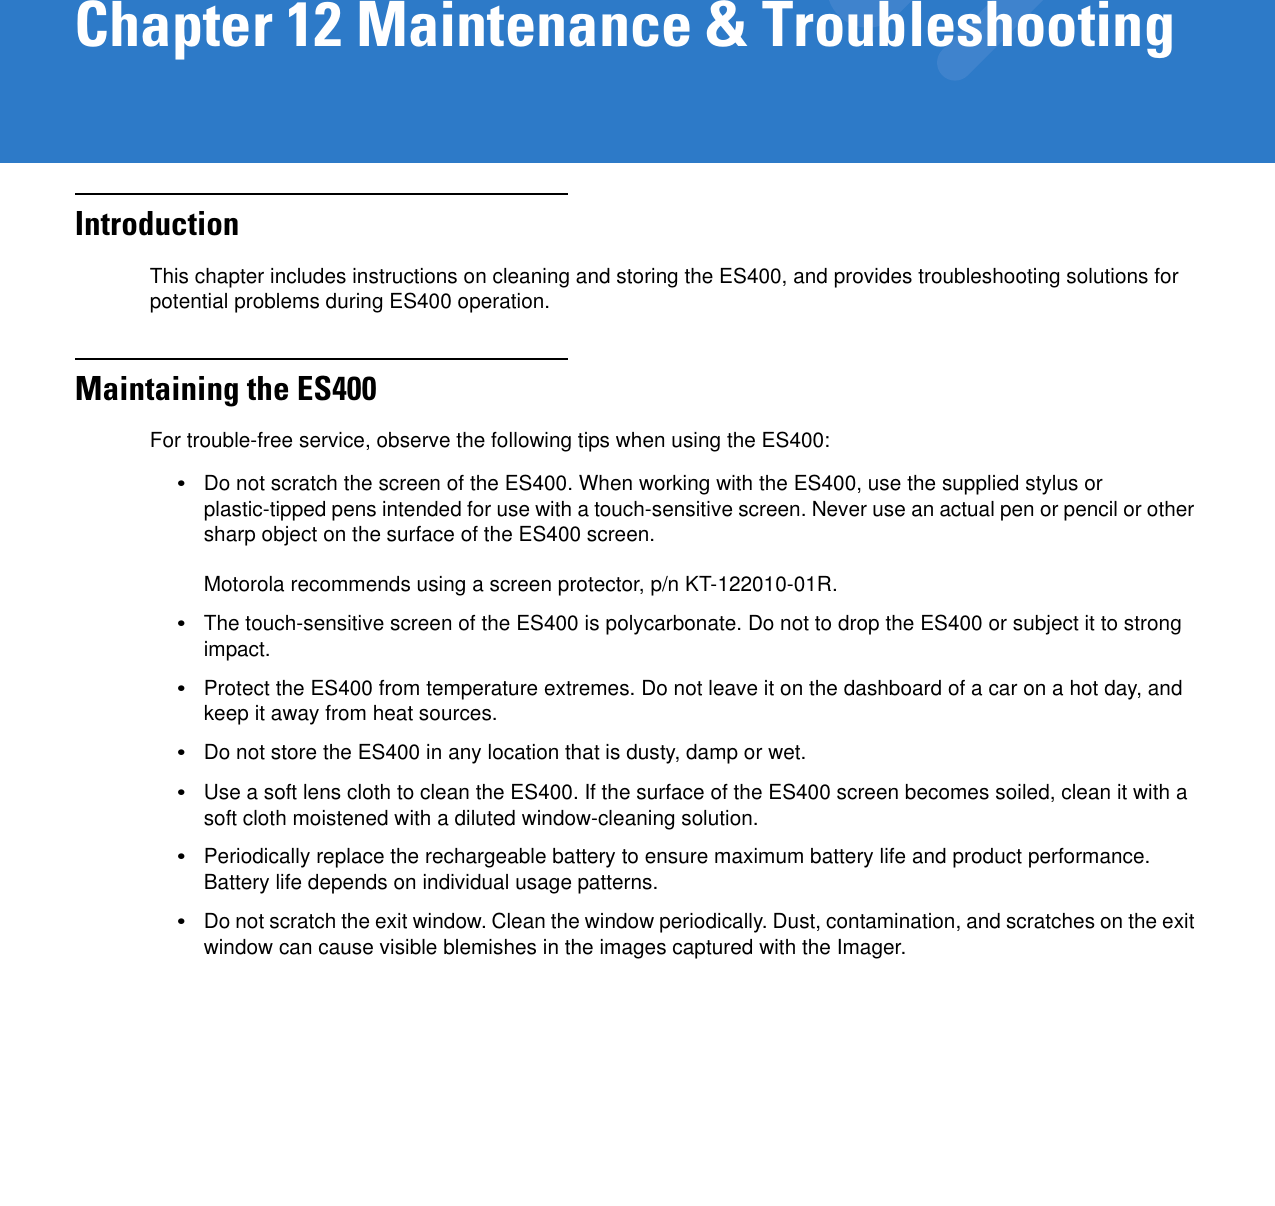 Chapter 12 Maintenance &amp; TroubleshootingIntroductionThis chapter includes instructions on cleaning and storing the ES400, and provides troubleshooting solutions for potential problems during ES400 operation.Maintaining the ES400For trouble-free service, observe the following tips when using the ES400:•Do not scratch the screen of the ES400. When working with the ES400, use the supplied stylus or plastic-tipped pens intended for use with a touch-sensitive screen. Never use an actual pen or pencil or other sharp object on the surface of the ES400 screen. Motorola recommends using a screen protector, p/n KT-122010-01R.•The touch-sensitive screen of the ES400 is polycarbonate. Do not to drop the ES400 or subject it to strong impact.•Protect the ES400 from temperature extremes. Do not leave it on the dashboard of a car on a hot day, and keep it away from heat sources.•Do not store the ES400 in any location that is dusty, damp or wet.•Use a soft lens cloth to clean the ES400. If the surface of the ES400 screen becomes soiled, clean it with a soft cloth moistened with a diluted window-cleaning solution.•Periodically replace the rechargeable battery to ensure maximum battery life and product performance. Battery life depends on individual usage patterns.•Do not scratch the exit window. Clean the window periodically. Dust, contamination, and scratches on the exit window can cause visible blemishes in the images captured with the Imager.